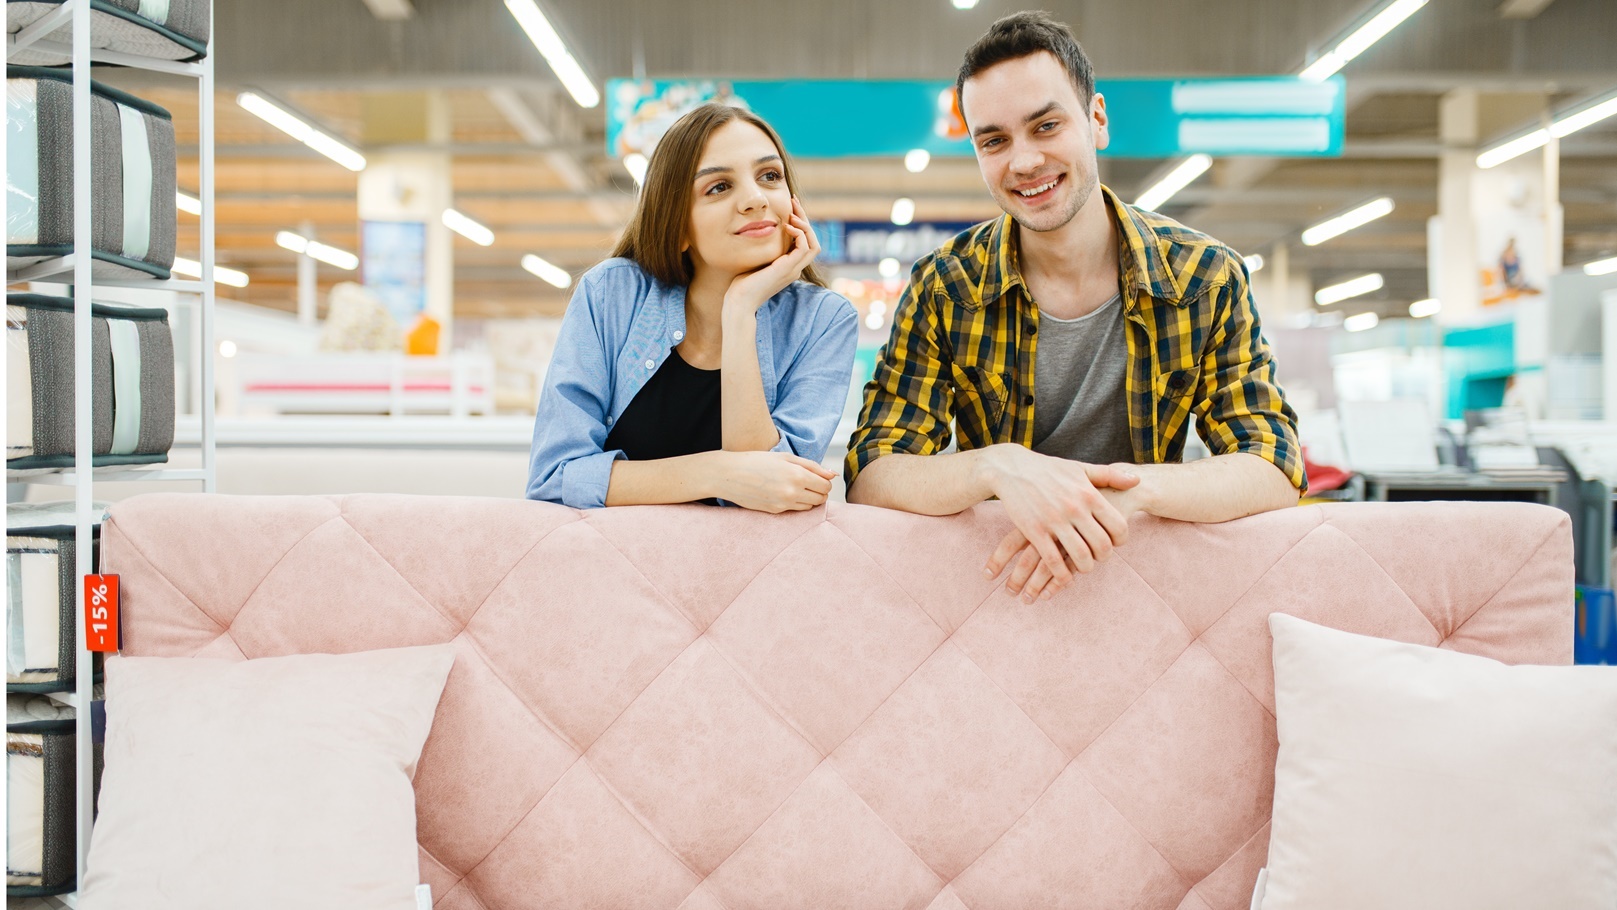 couple-poses-at-the-pink-couch-in-furniture-store-2021-08-28-09-23-32-utc